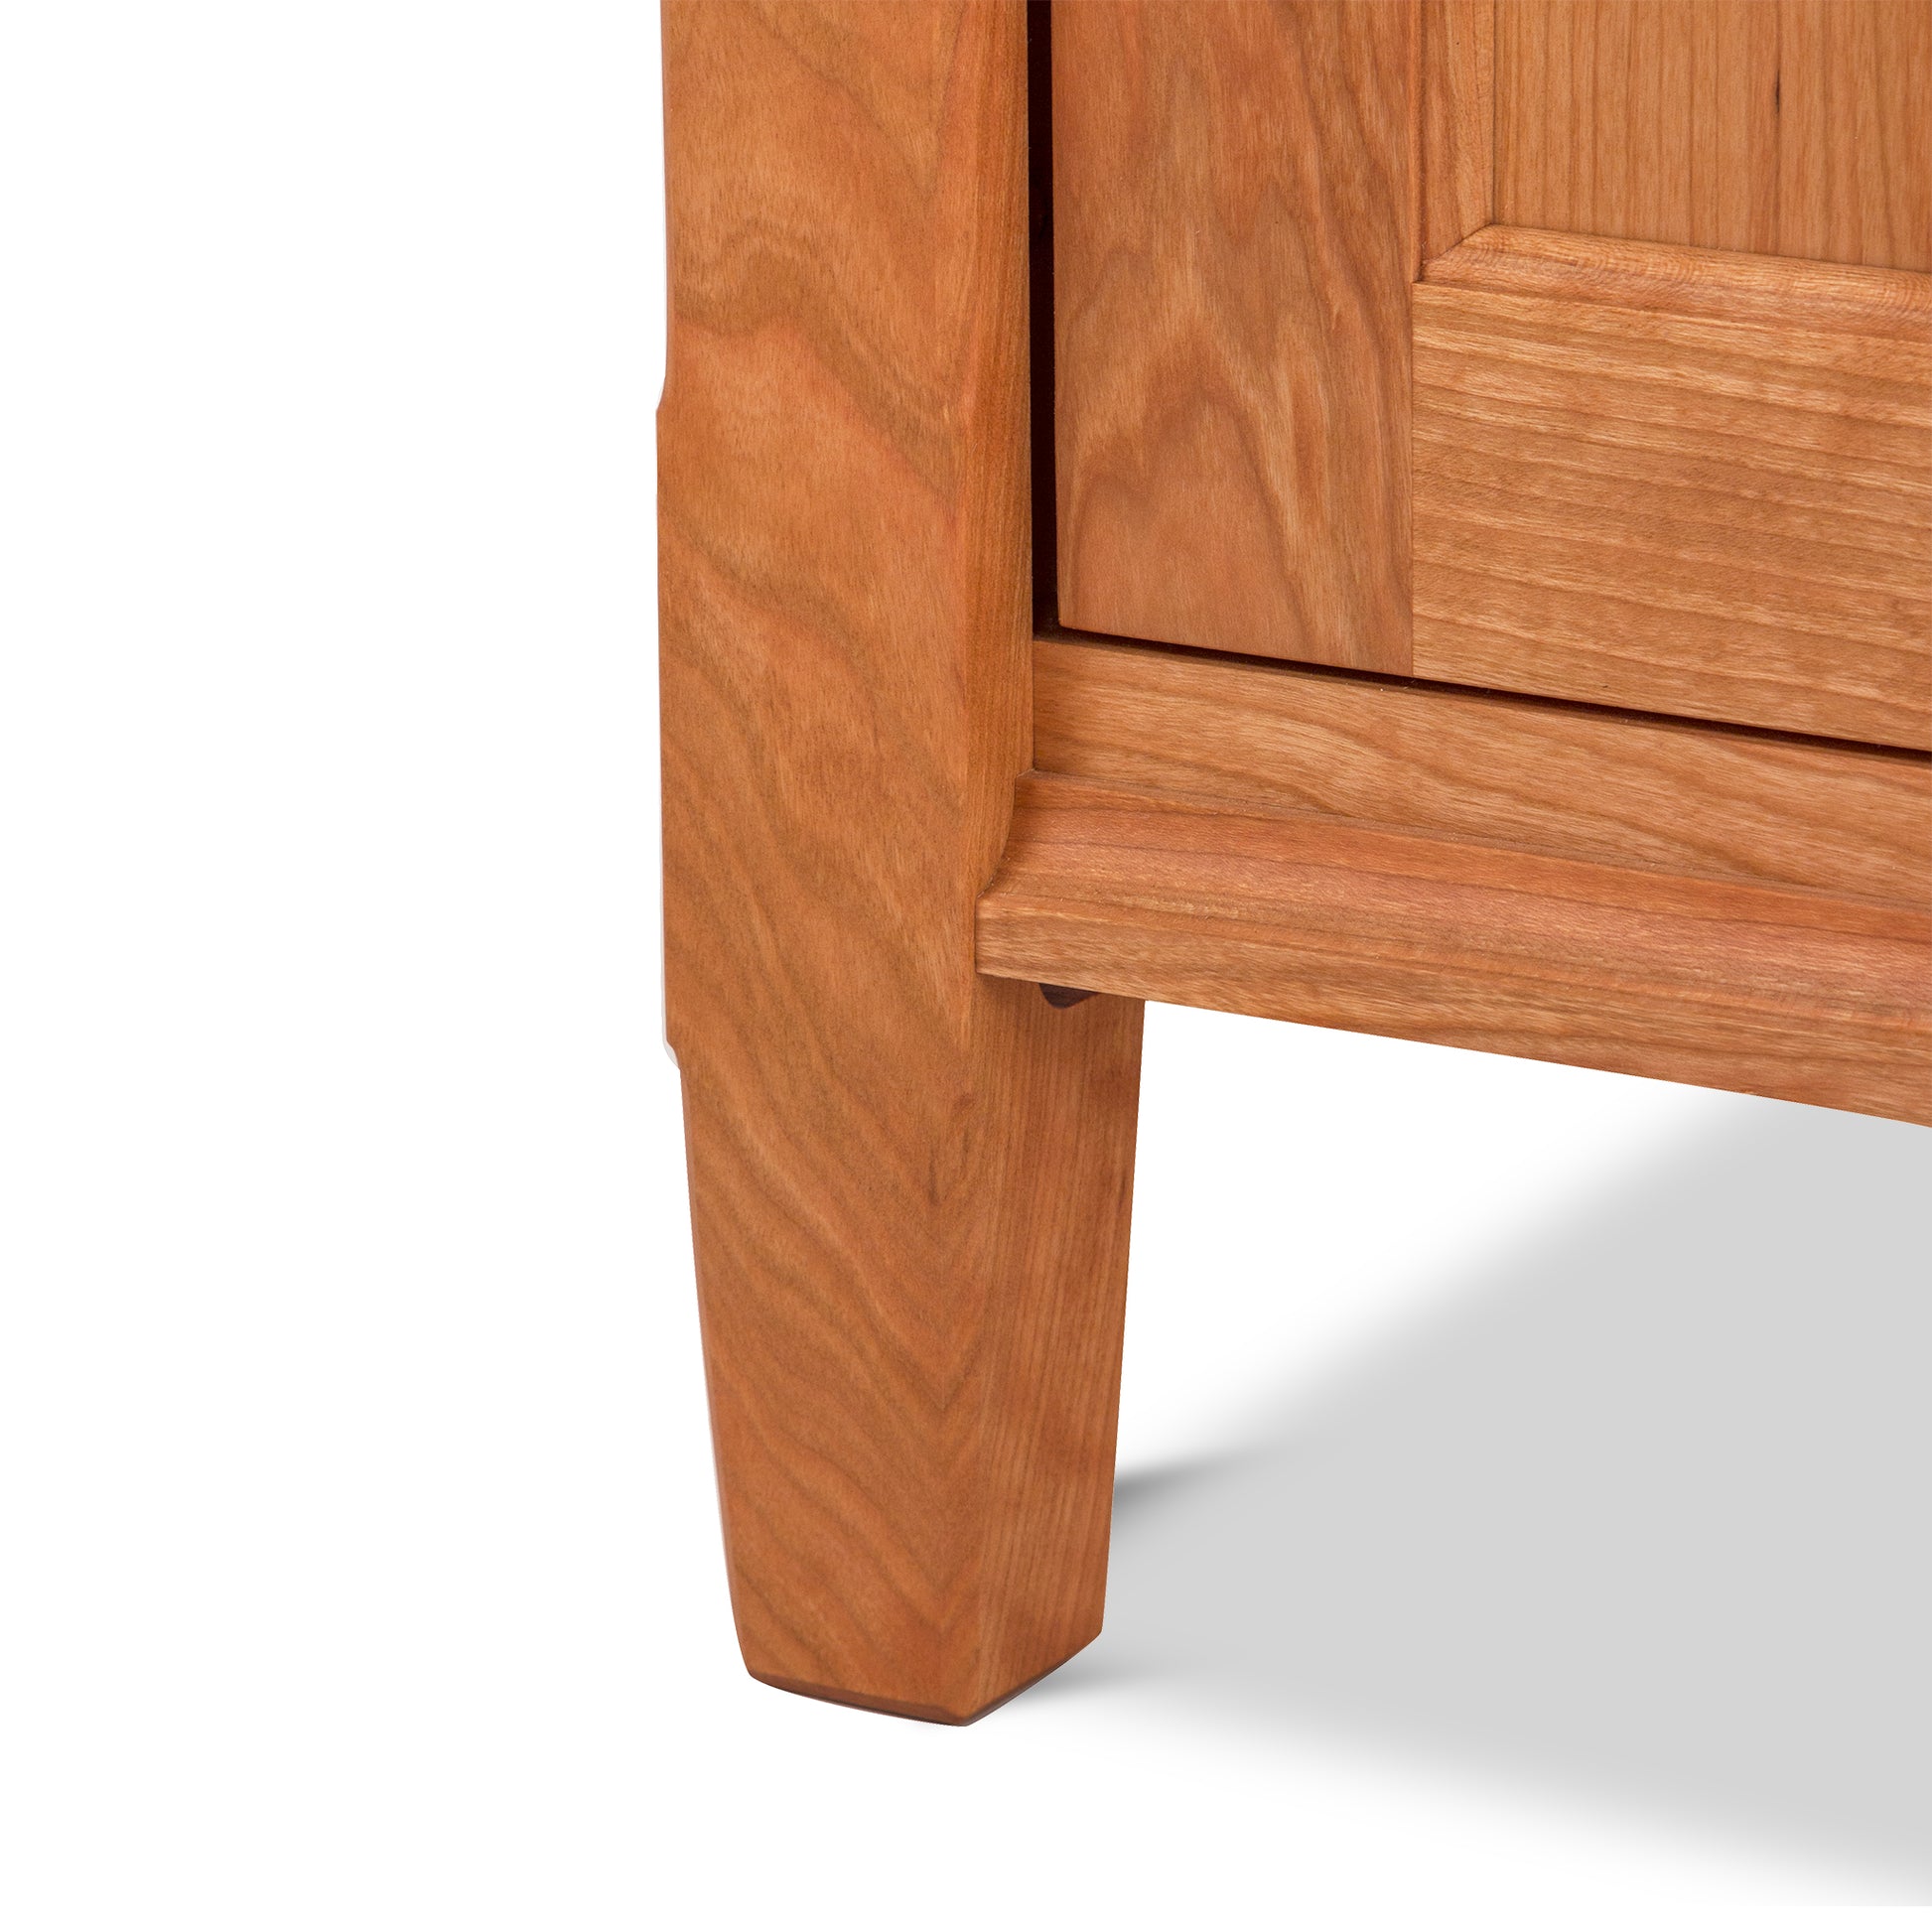 Close-up of a wooden drawer and leg of a Maple Corner Woodworks Vermont Shaker 1-Drawer Nightstand with Door, showing detailed wood grain and construction, isolated on a white background.